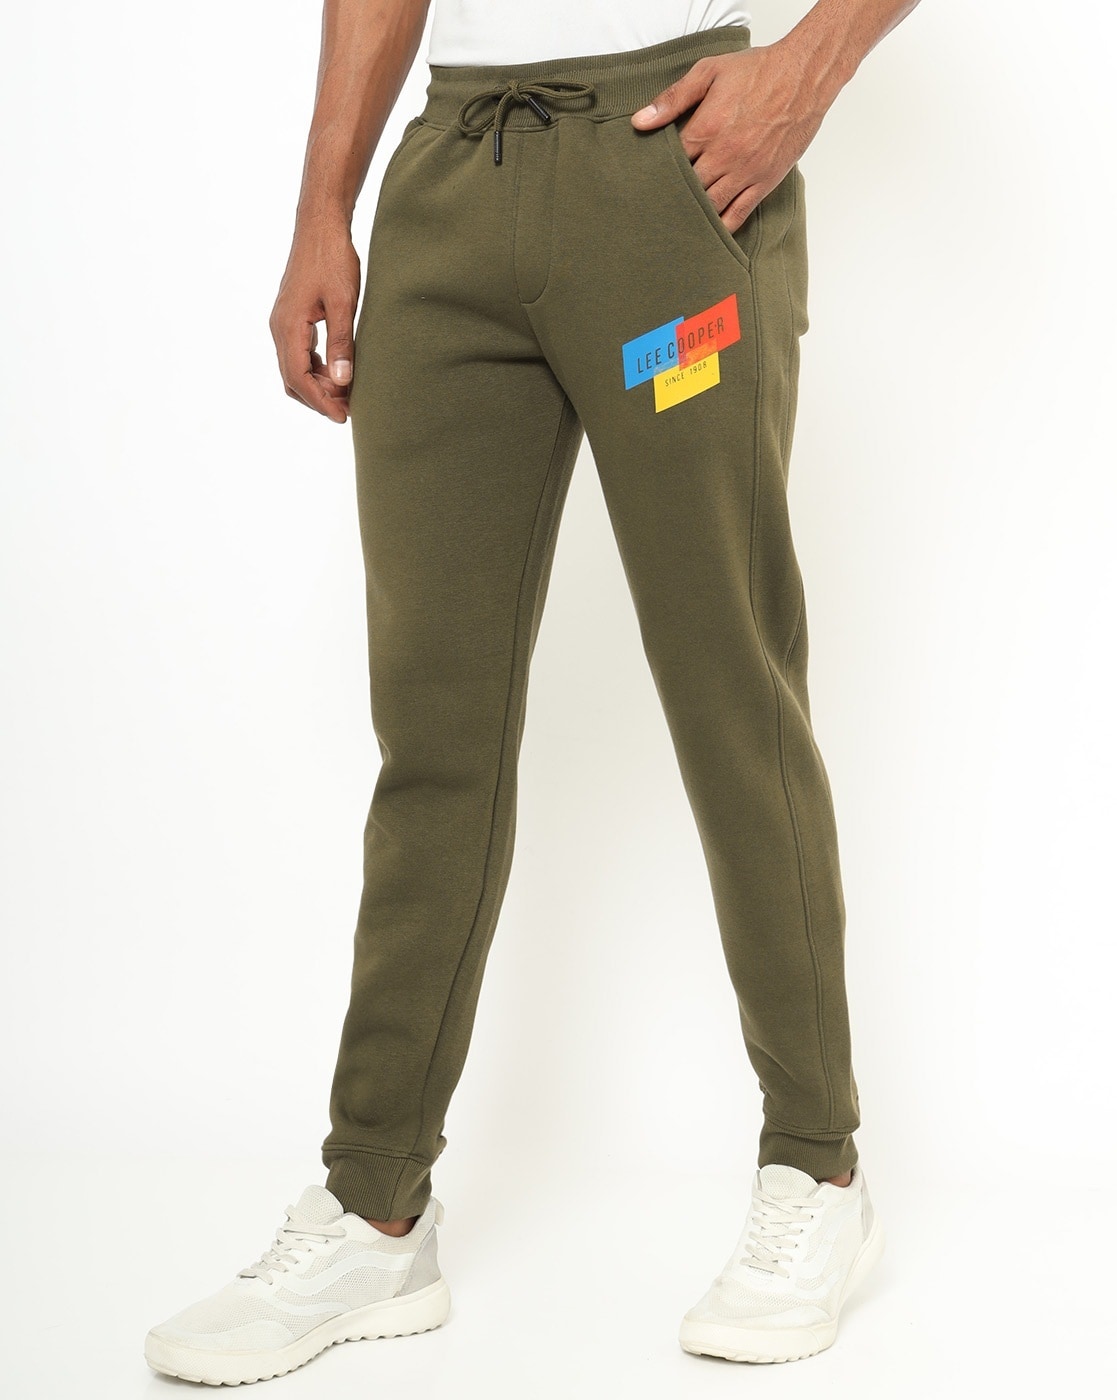 Lee Cooper Fleece Jogging Bottoms Mens from Sports direct on 21 Buttons